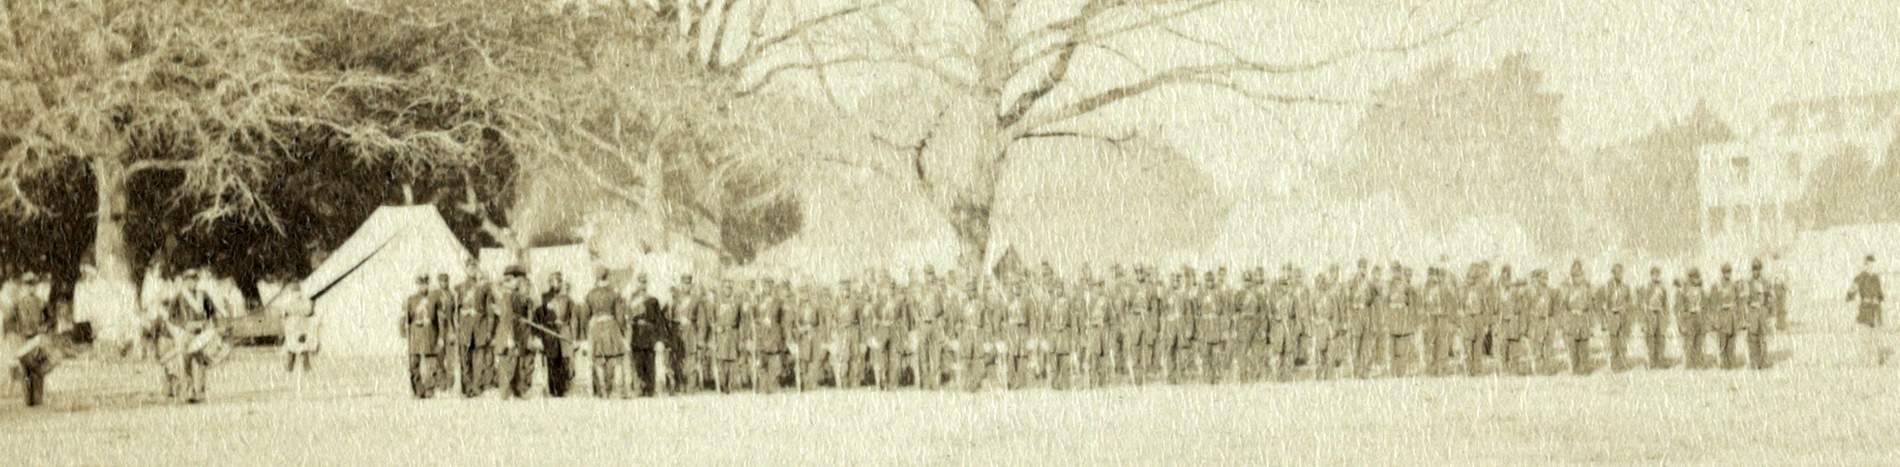 Dress Parade, First Regiment, South Carolina Volunteer Infantry, Beaufort, South Carolina, circa 1863, zoomable image, detail